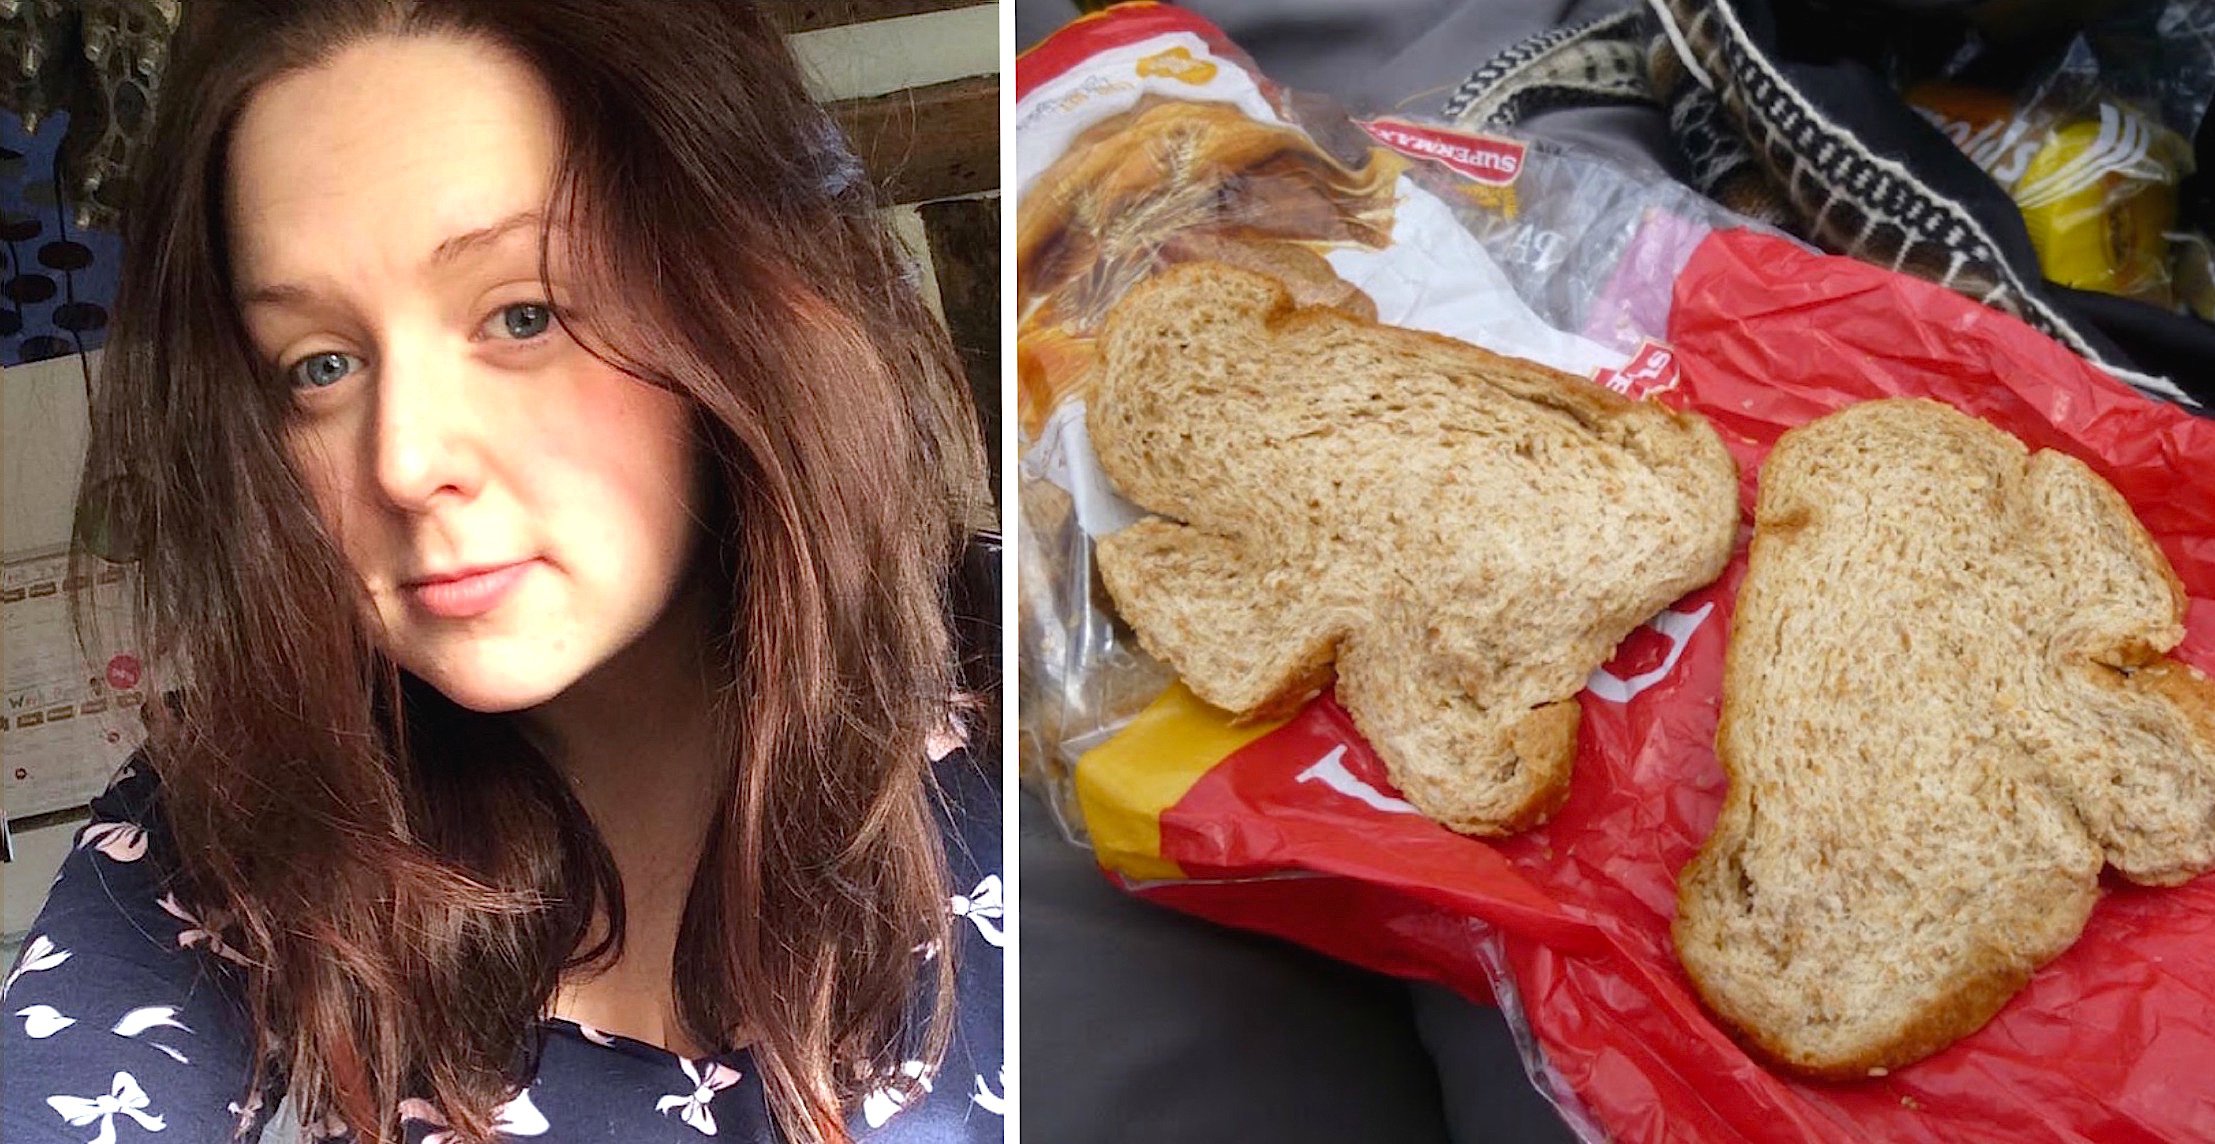 bread.jpg?resize=412,232 - Tesco Shopper Writes About Her Experience With An Autistic Cashier.. HEARTWARMING!